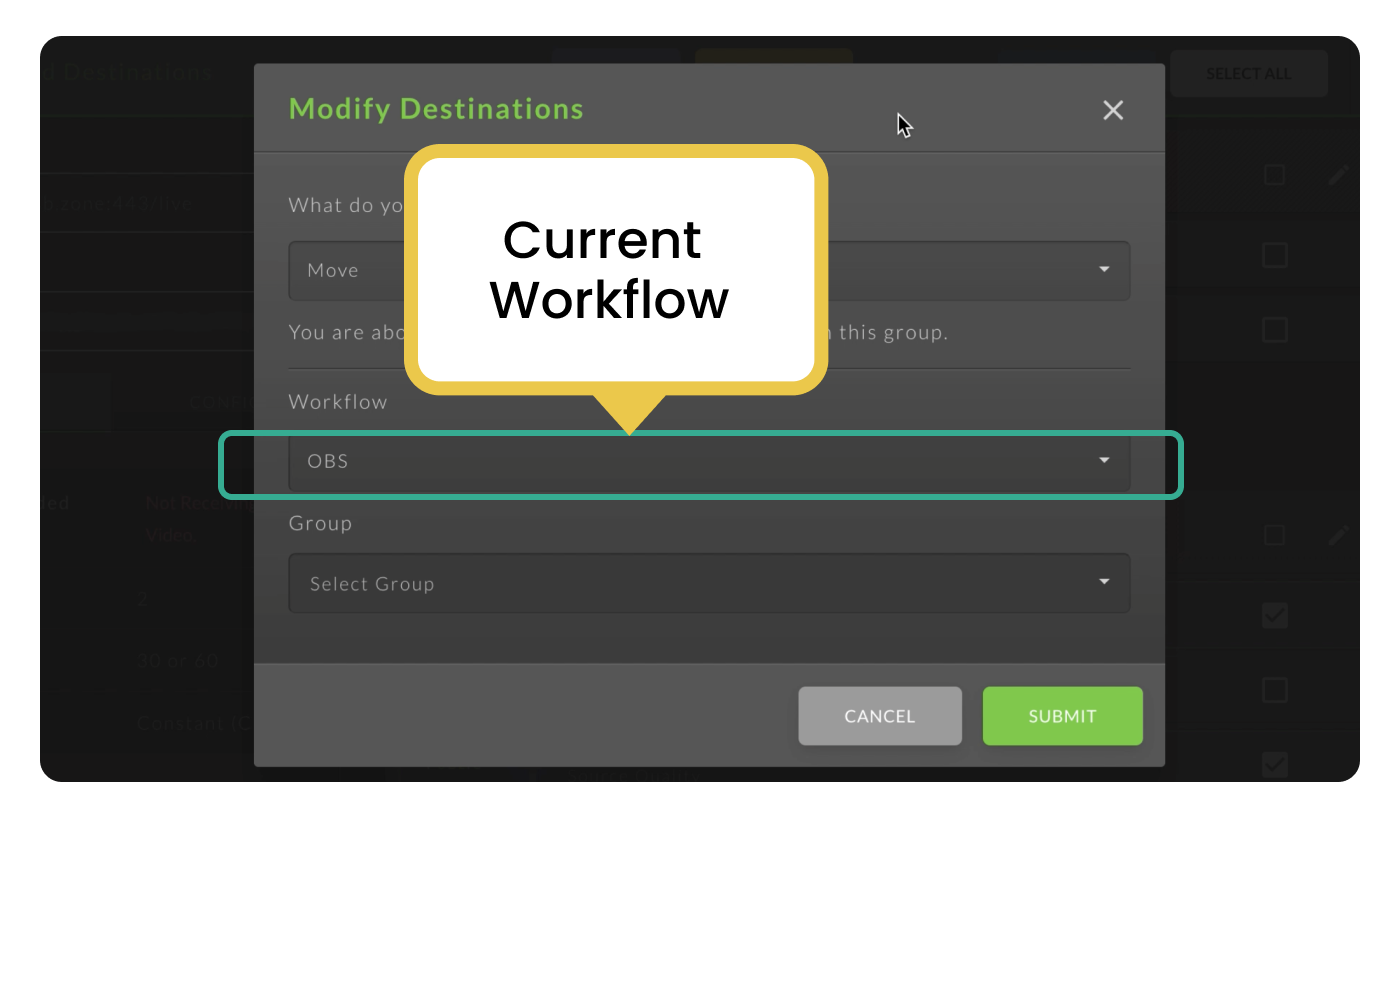 Movedestination-same-workflows-switchboardlive-howto 3a.png